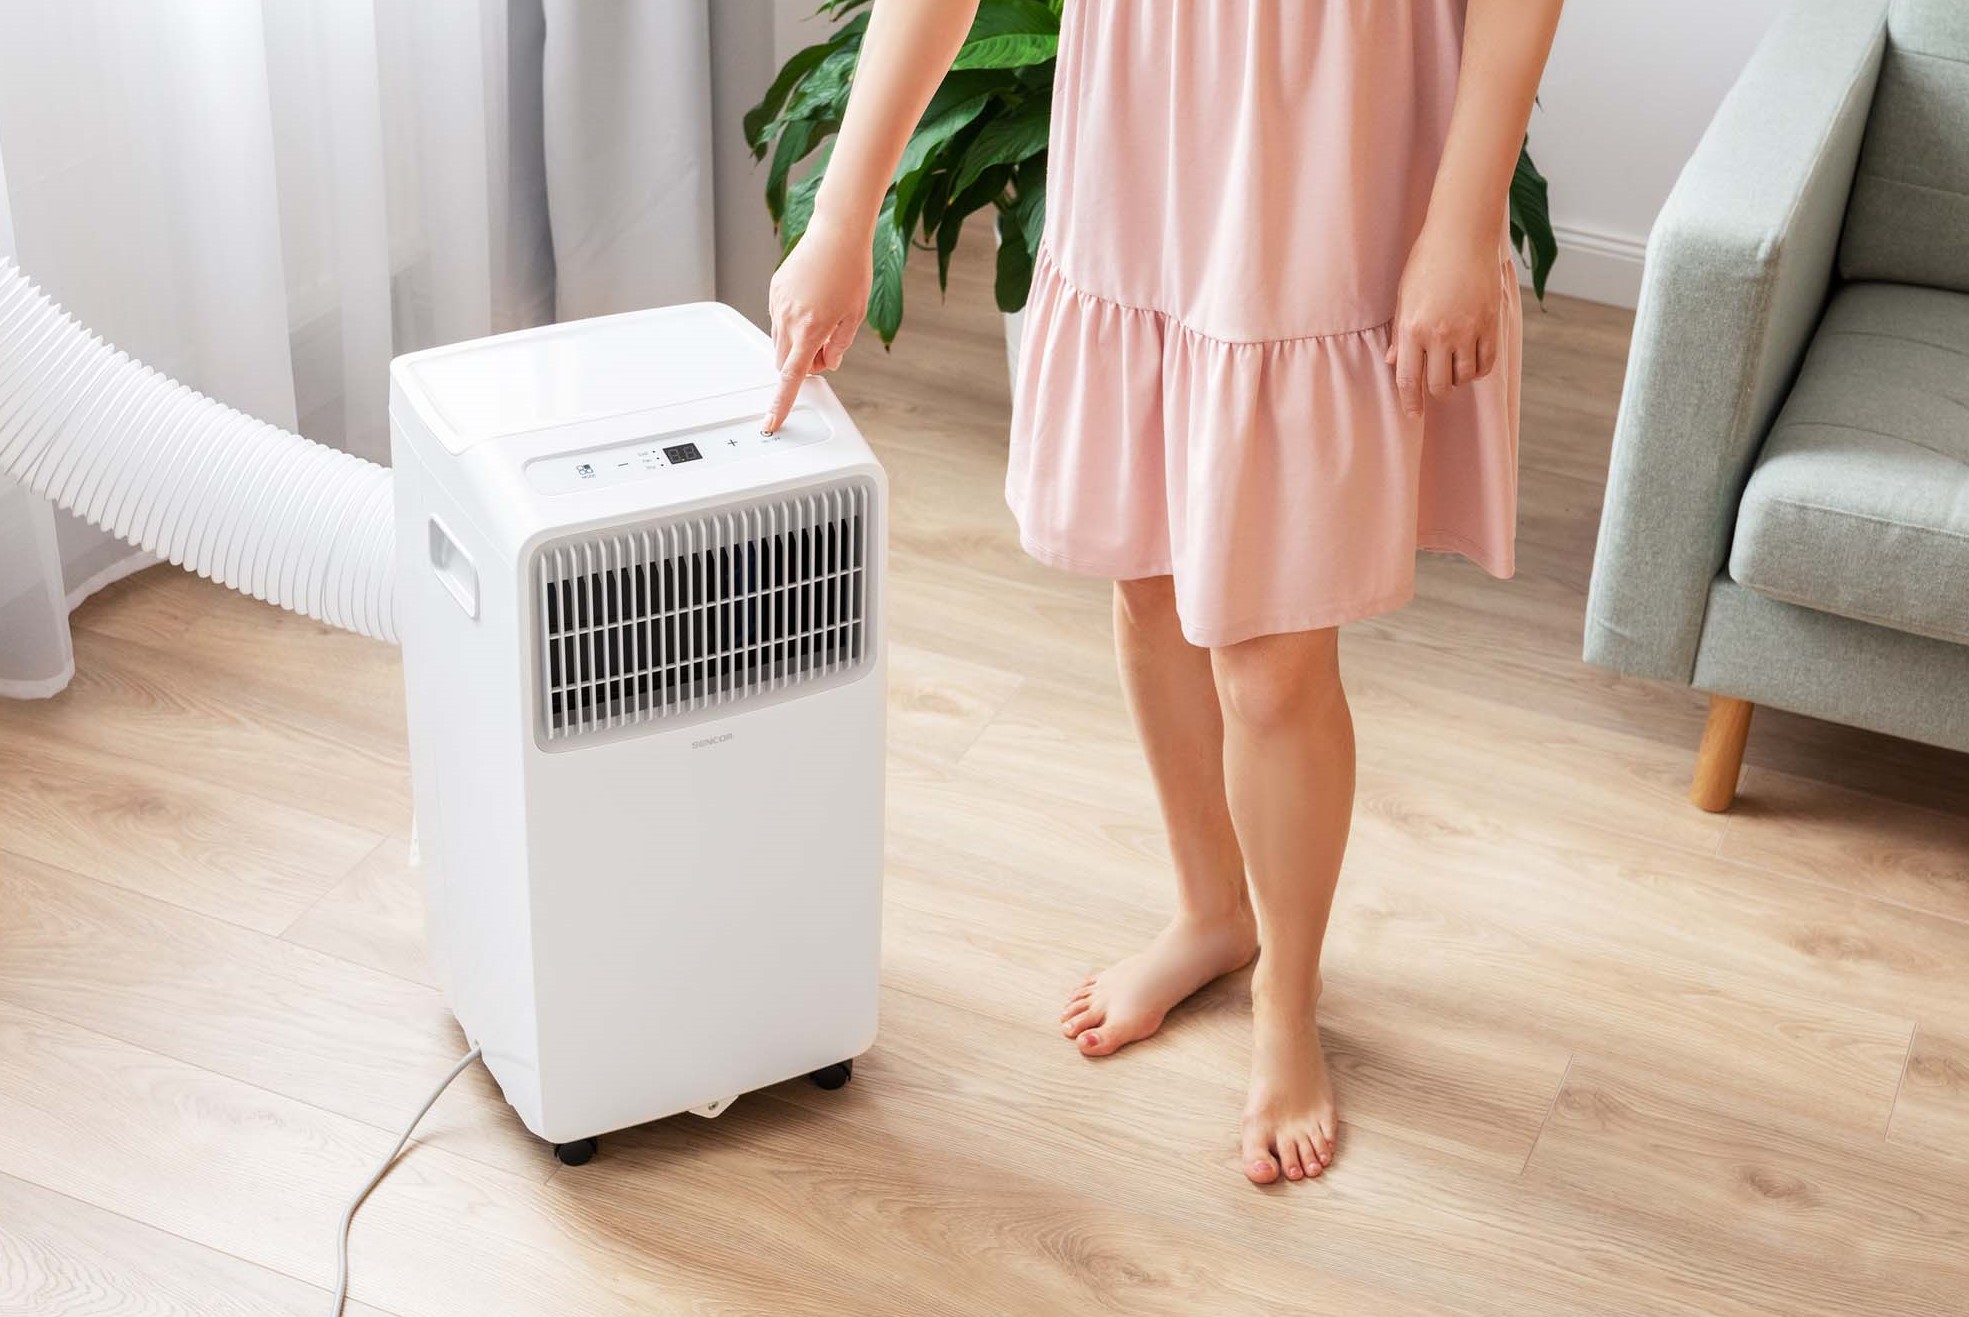 Easy Home Portable Air Conditioner - Bring The Breeze Anywhere